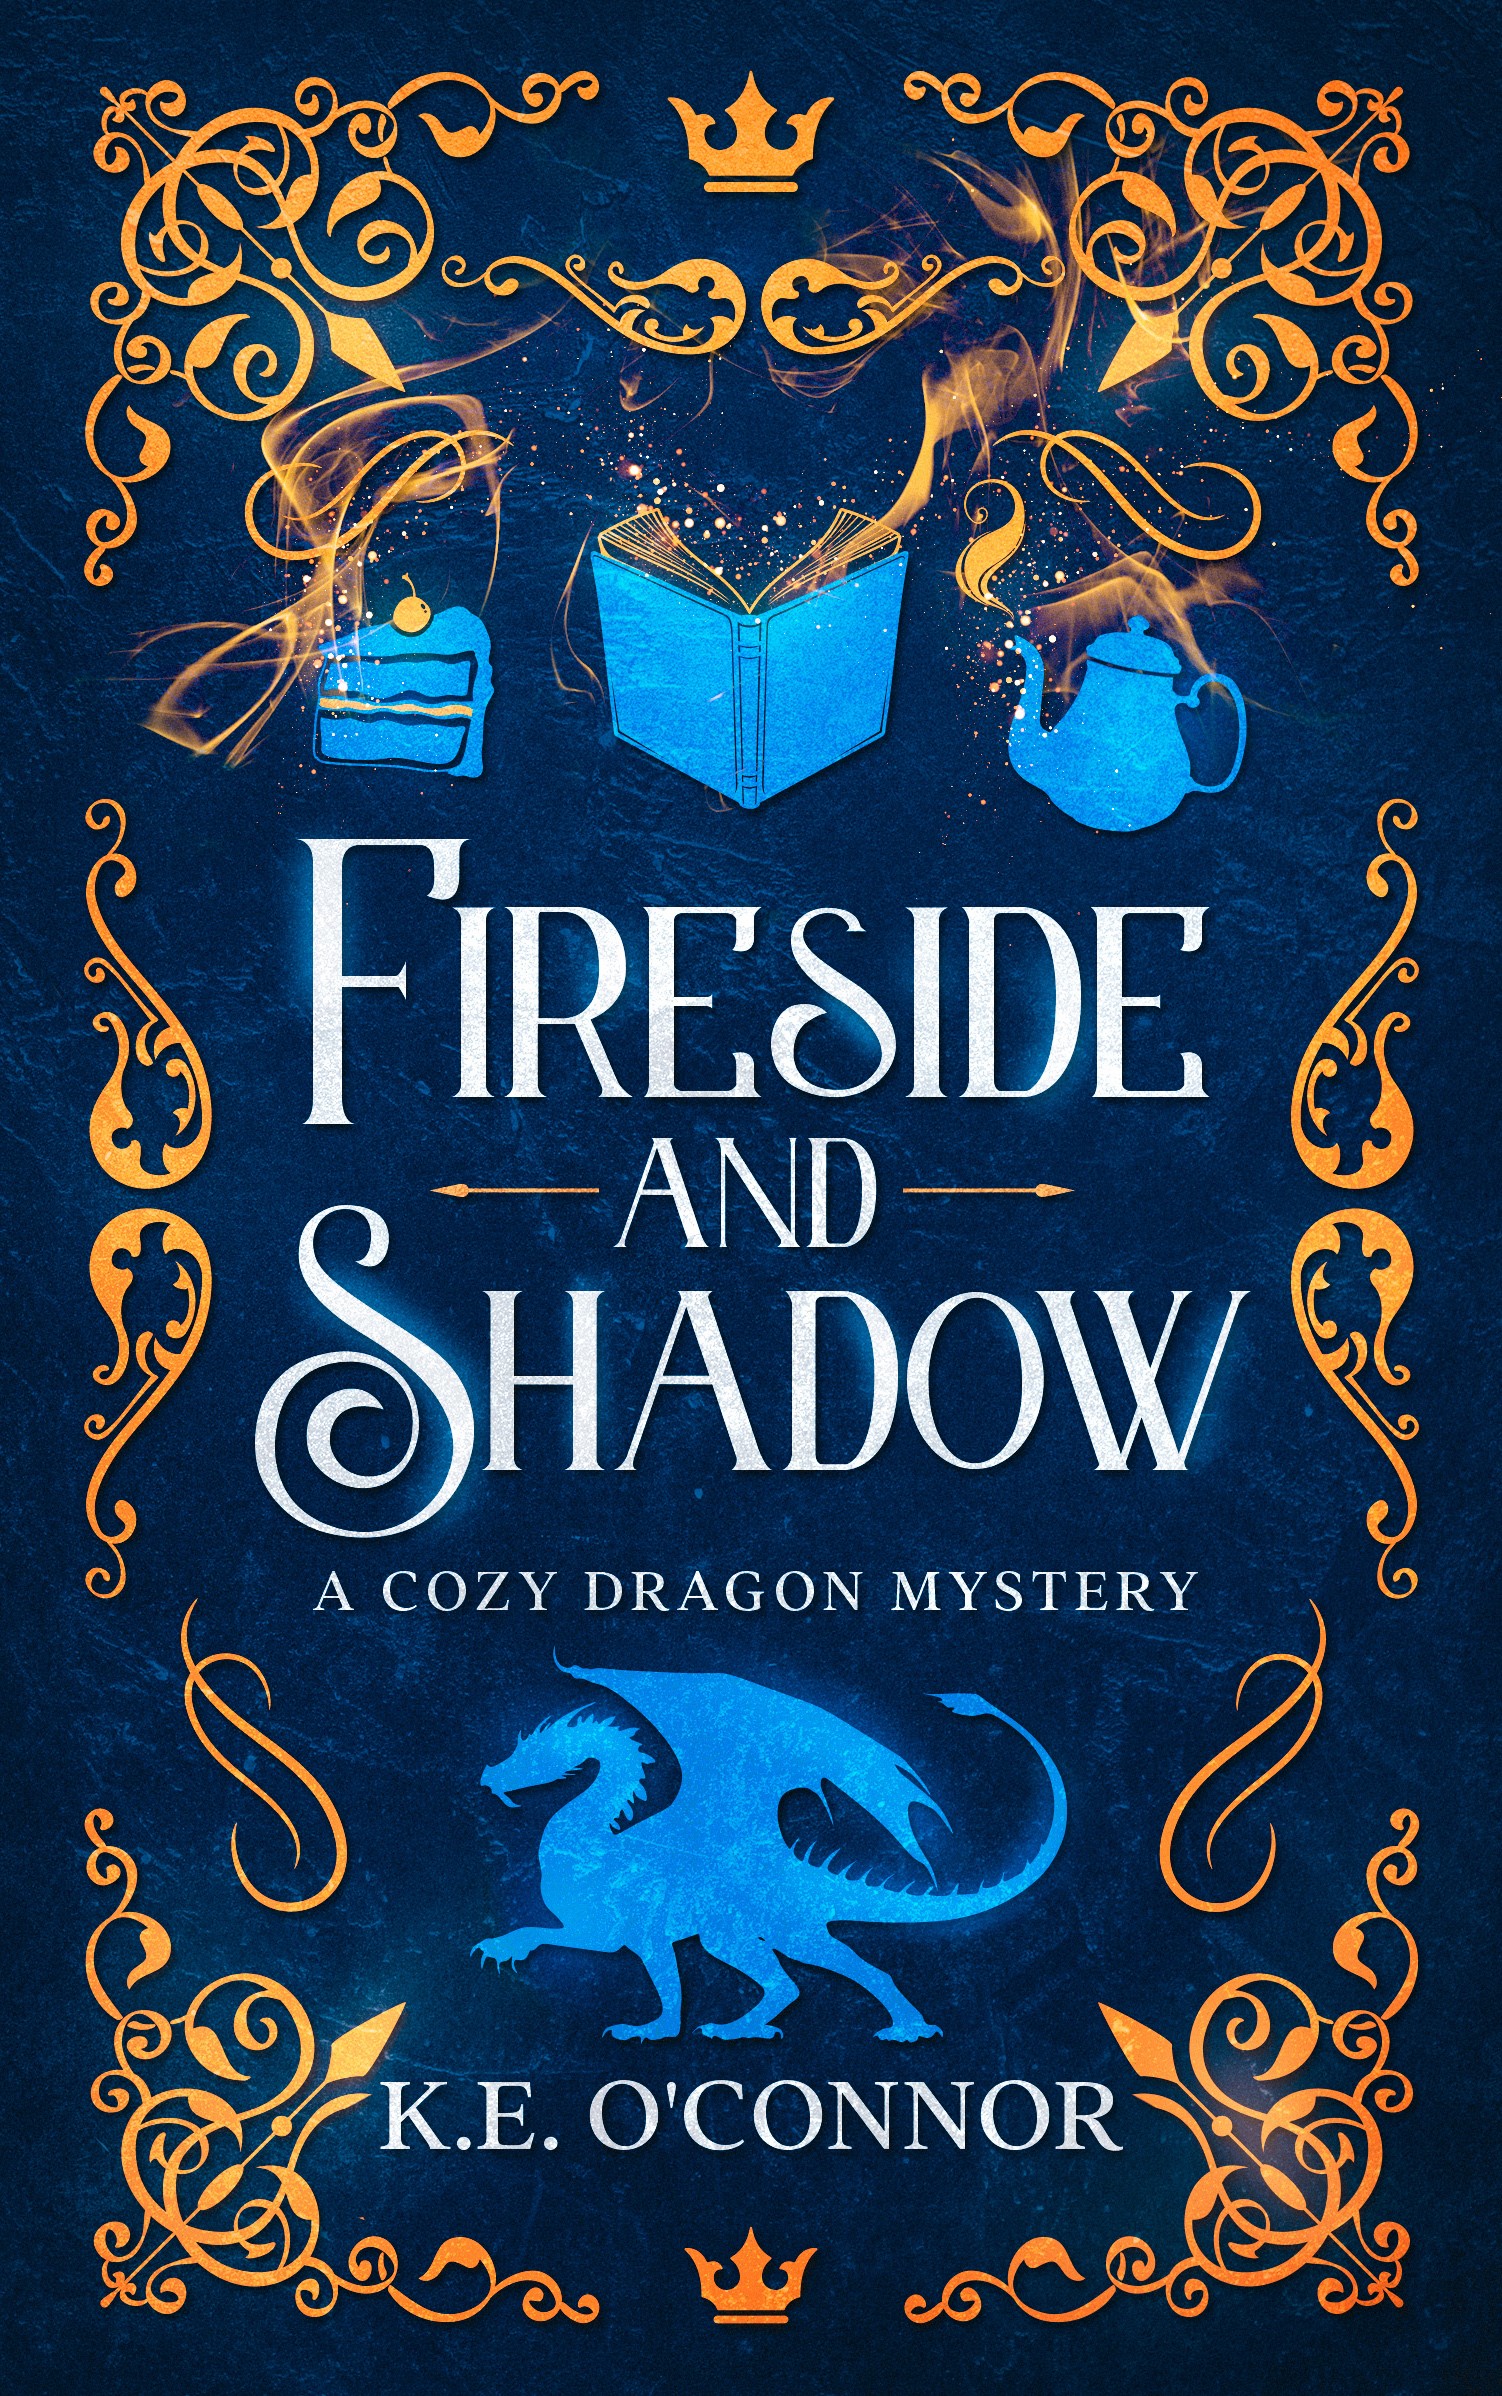 Fireside and Shadow book by K.E. O'Connor